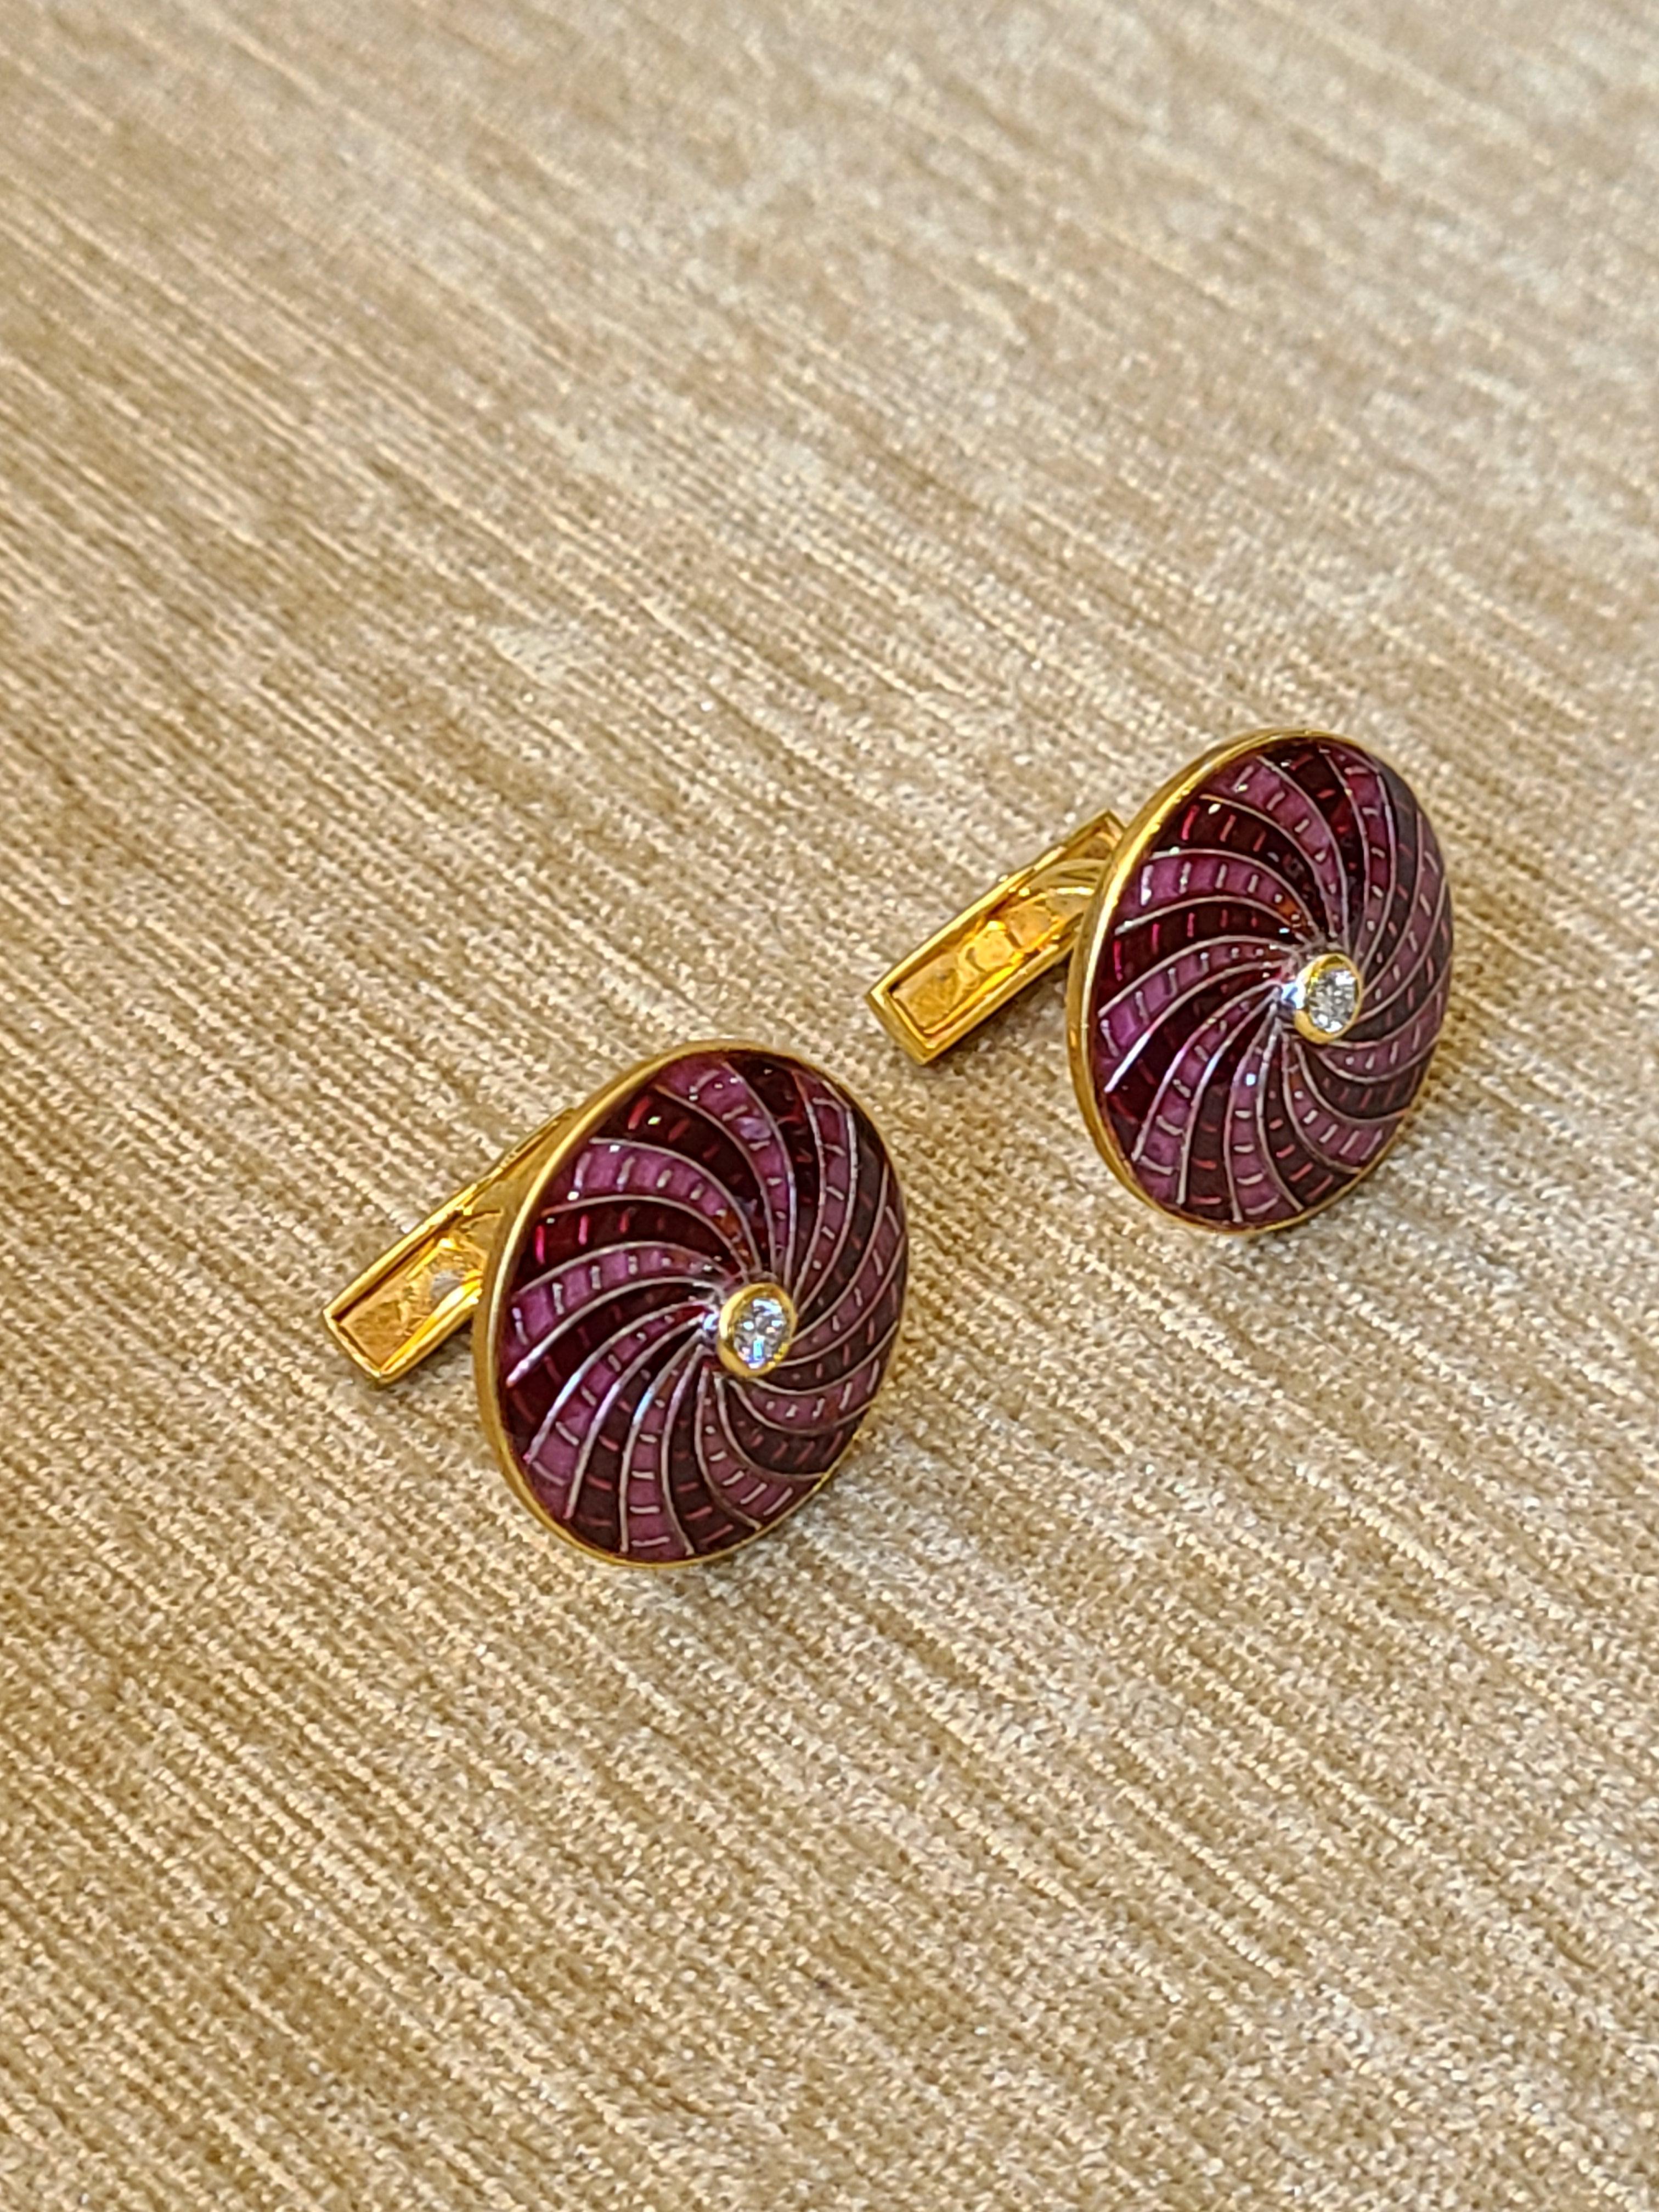 A beautiful pair of cufflinks set in 14k yellow gold with pink and red high finish enamel with diamonds. The cufflinks net gold weight is 12.72 grams and diamond weight is .30 carats . The cufflink dimension in cm 2 x 2 x 2.1 (LXWXD).